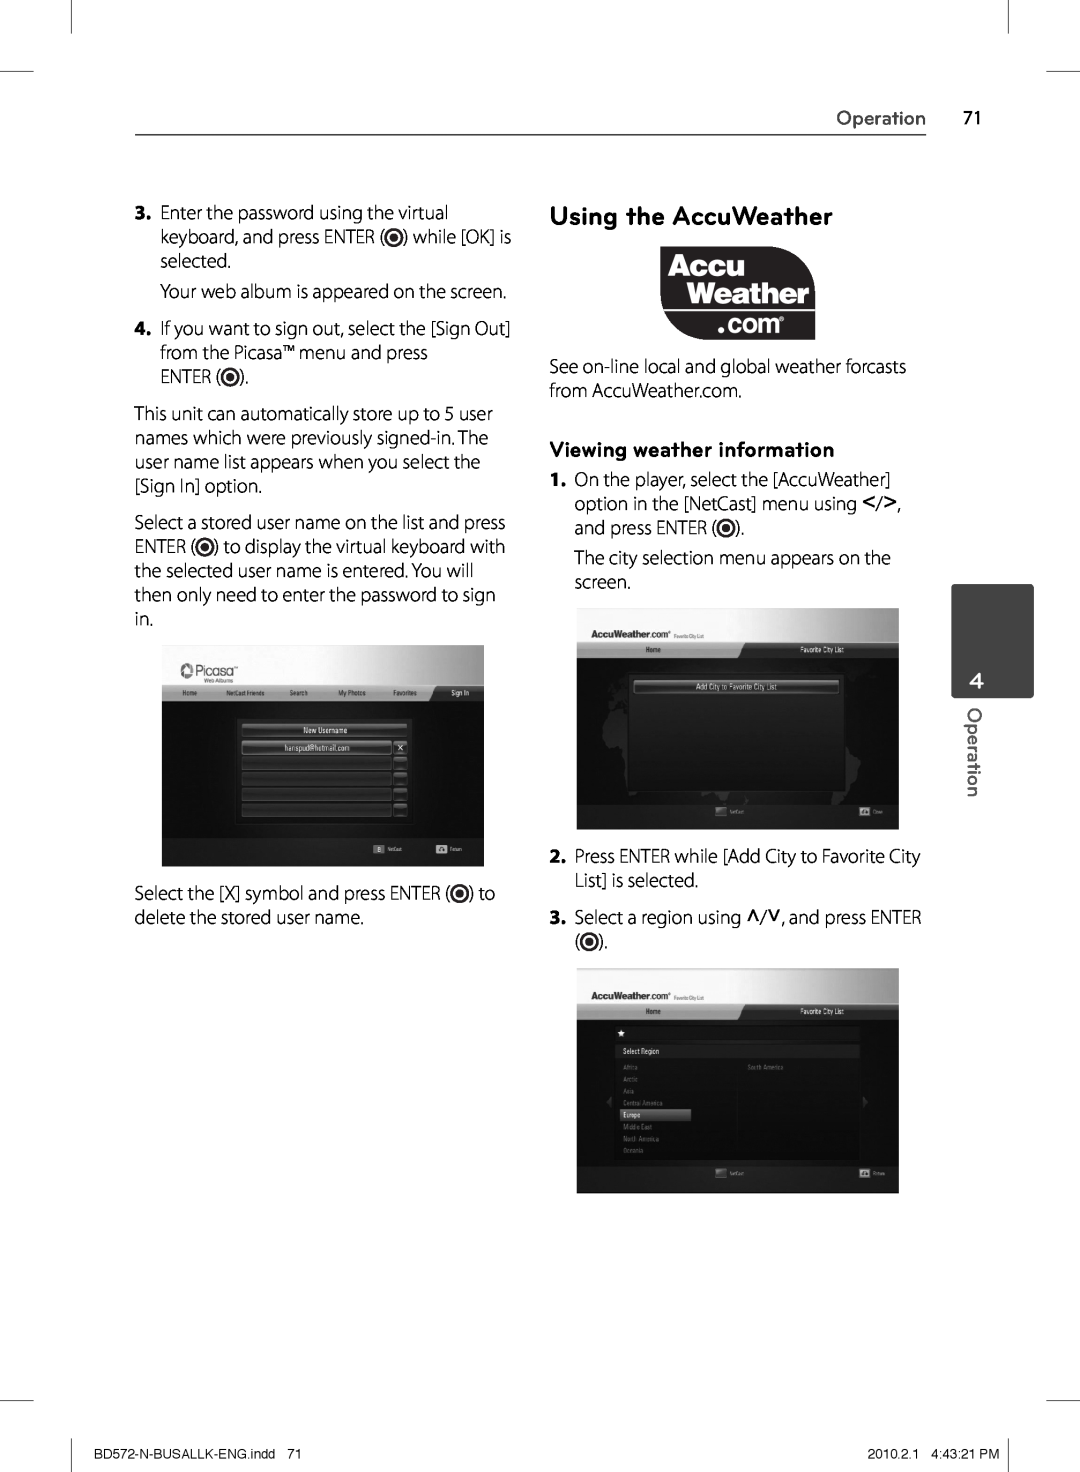 LG Electronics BD570 owner manual Using the AccuWeather, Viewing weather information, Operation 